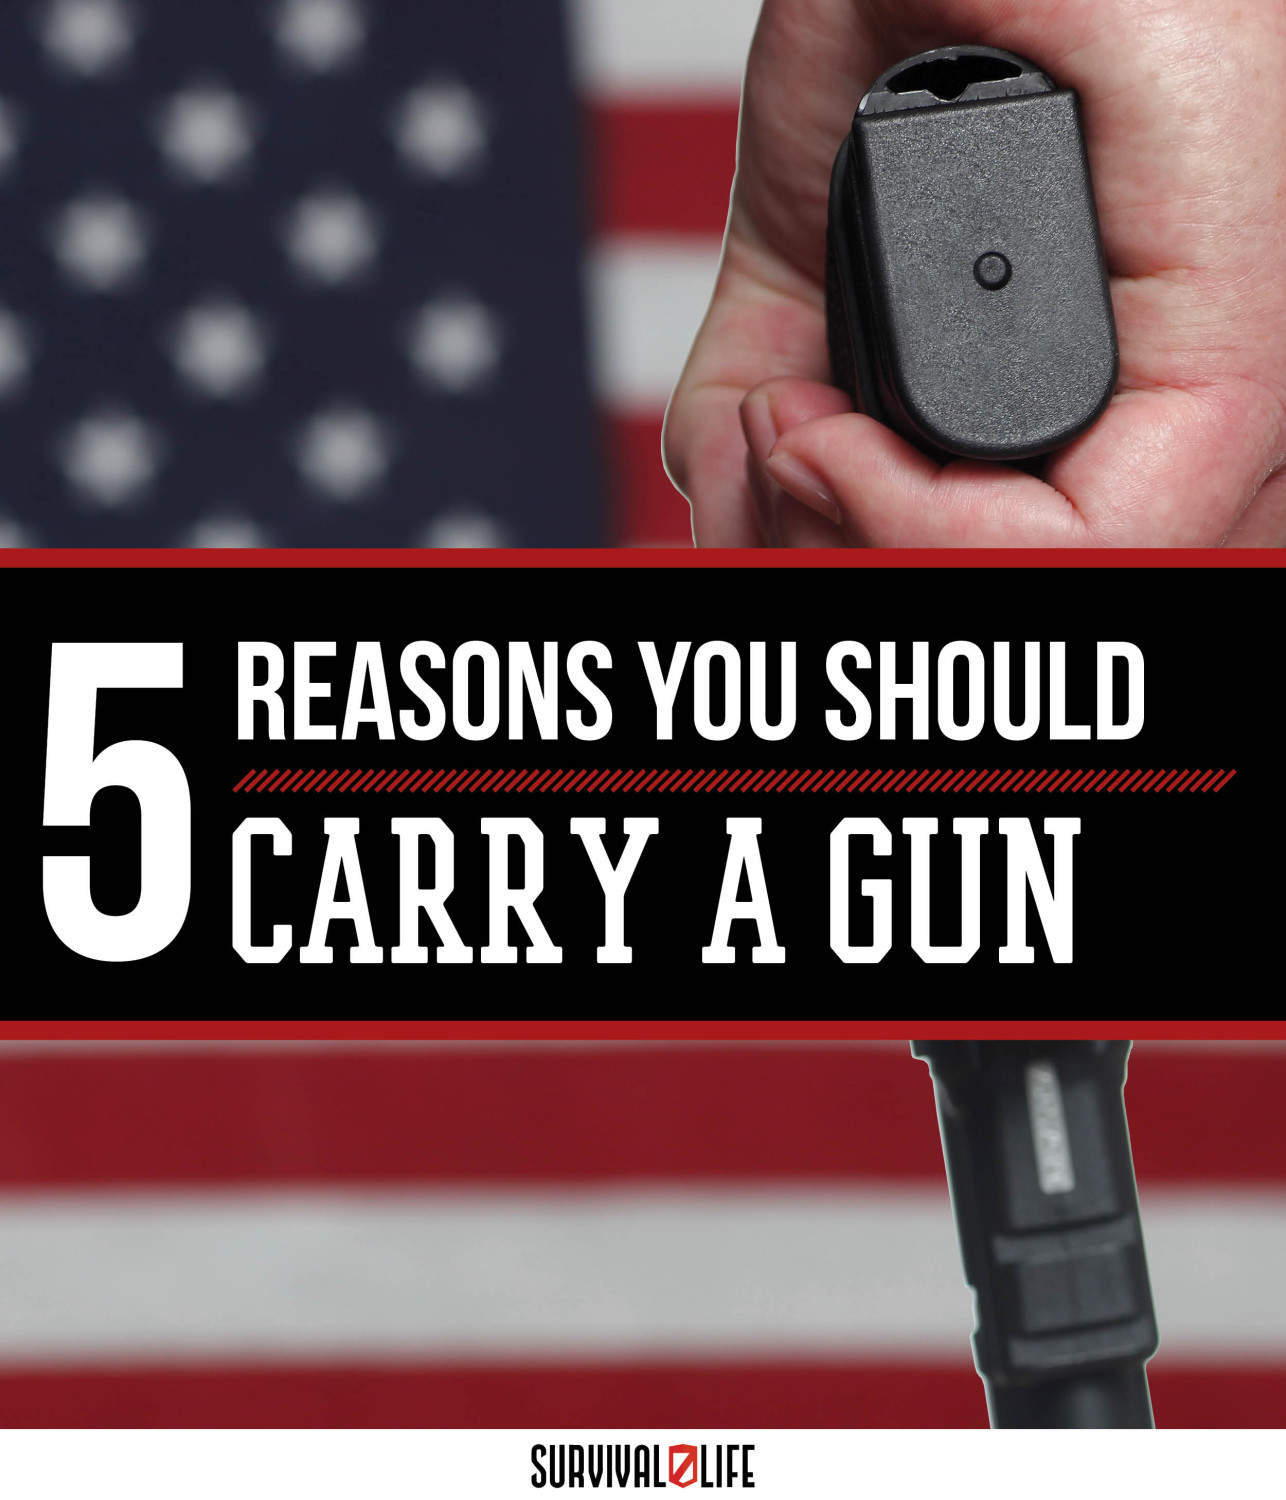 5 Reasons to Carry a Gun by Survival Life at http://survivallife.com/why-carry-a-gun/